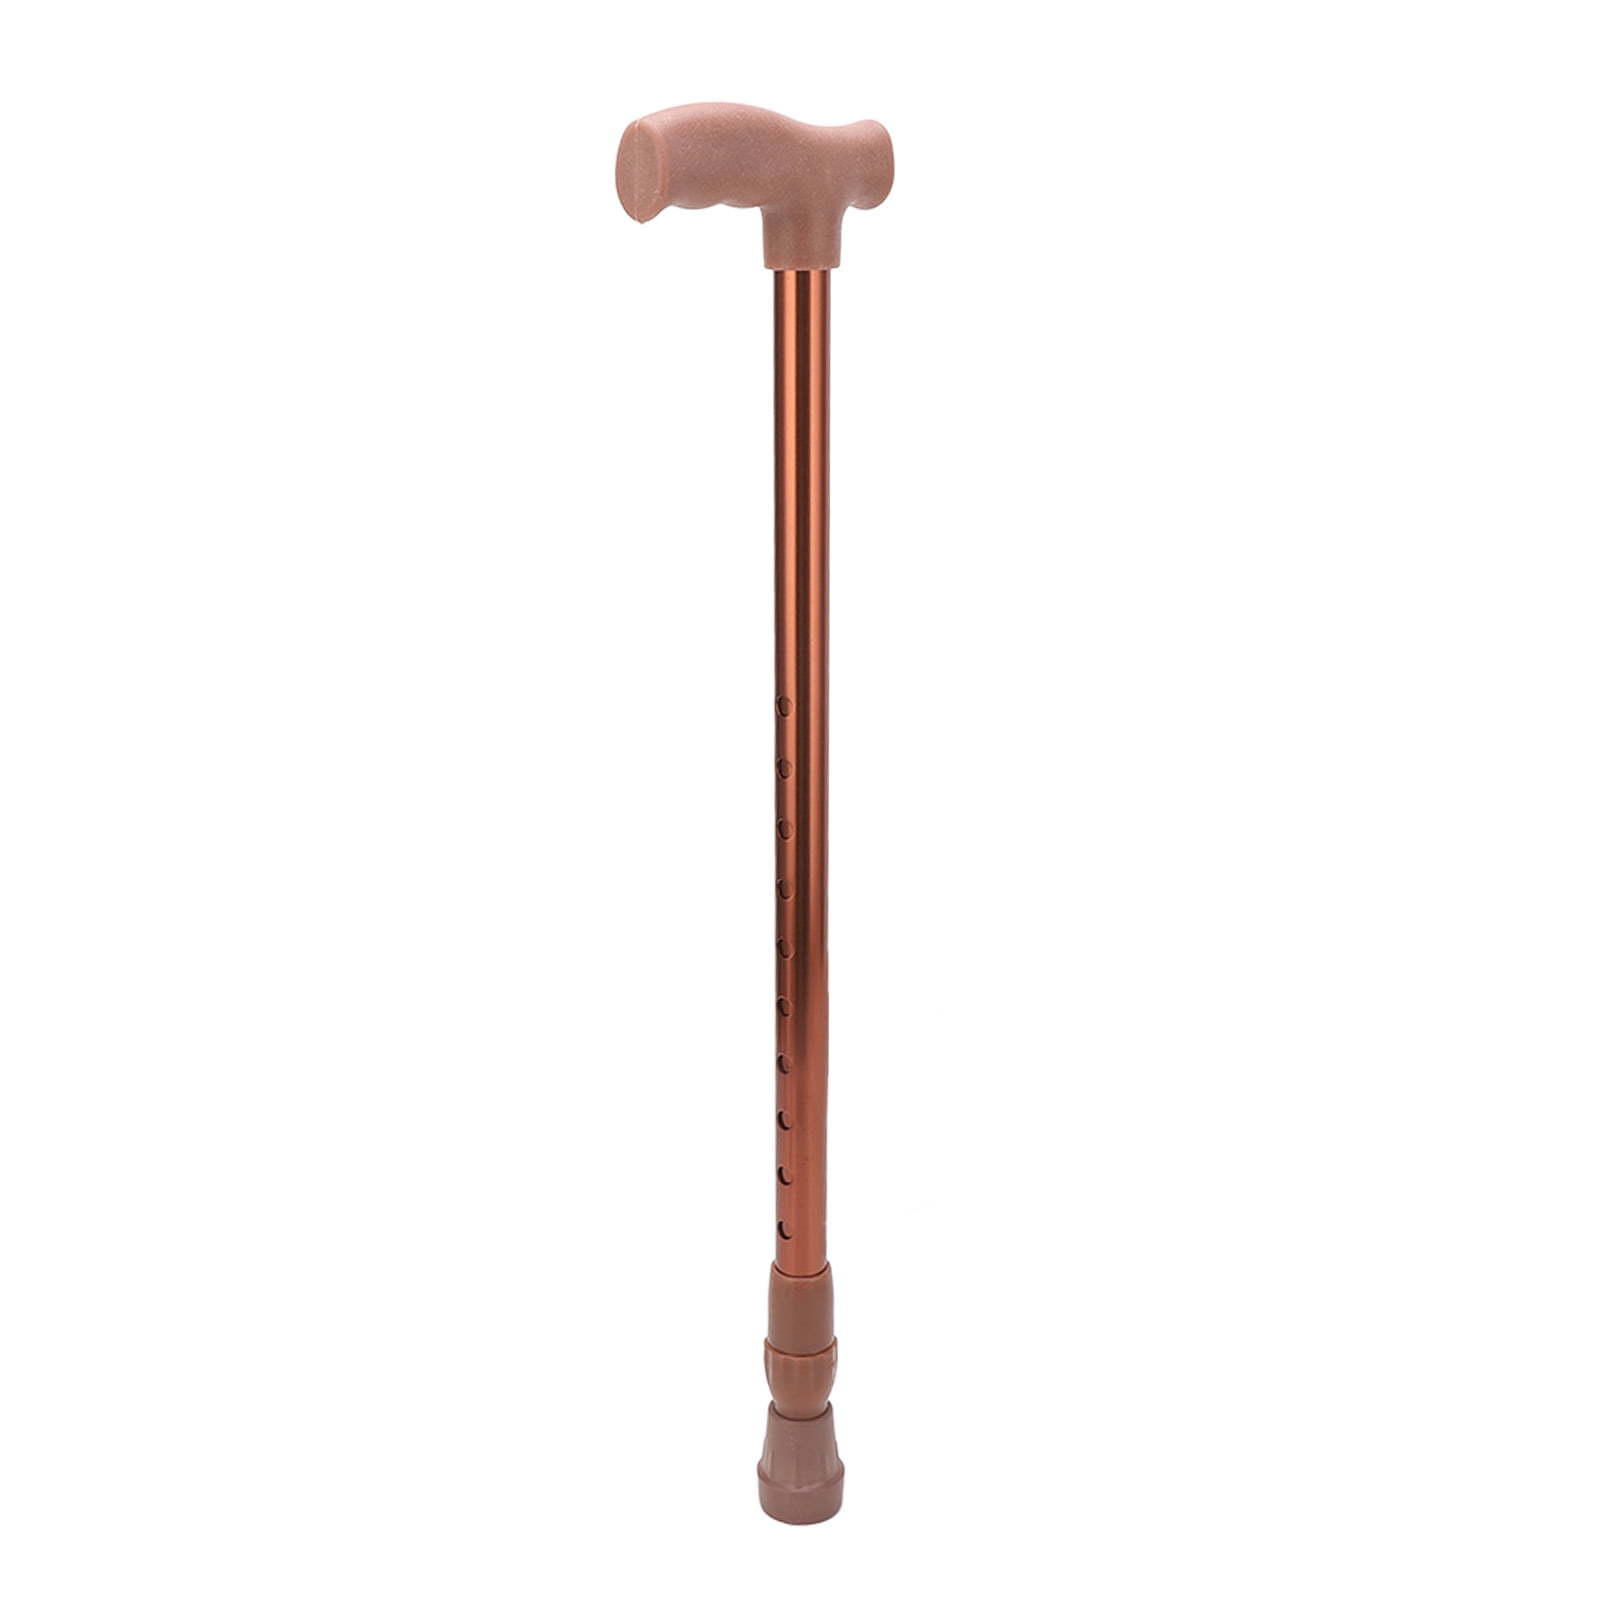 Carex Wooden Walking Cane - Round Handle Wood Cane with Natural Ash Finish  and Rubber Tip - Traditional Style Walking Stick for Men and Women, 36 Inch  Height, 7/8 Inch Diameter 